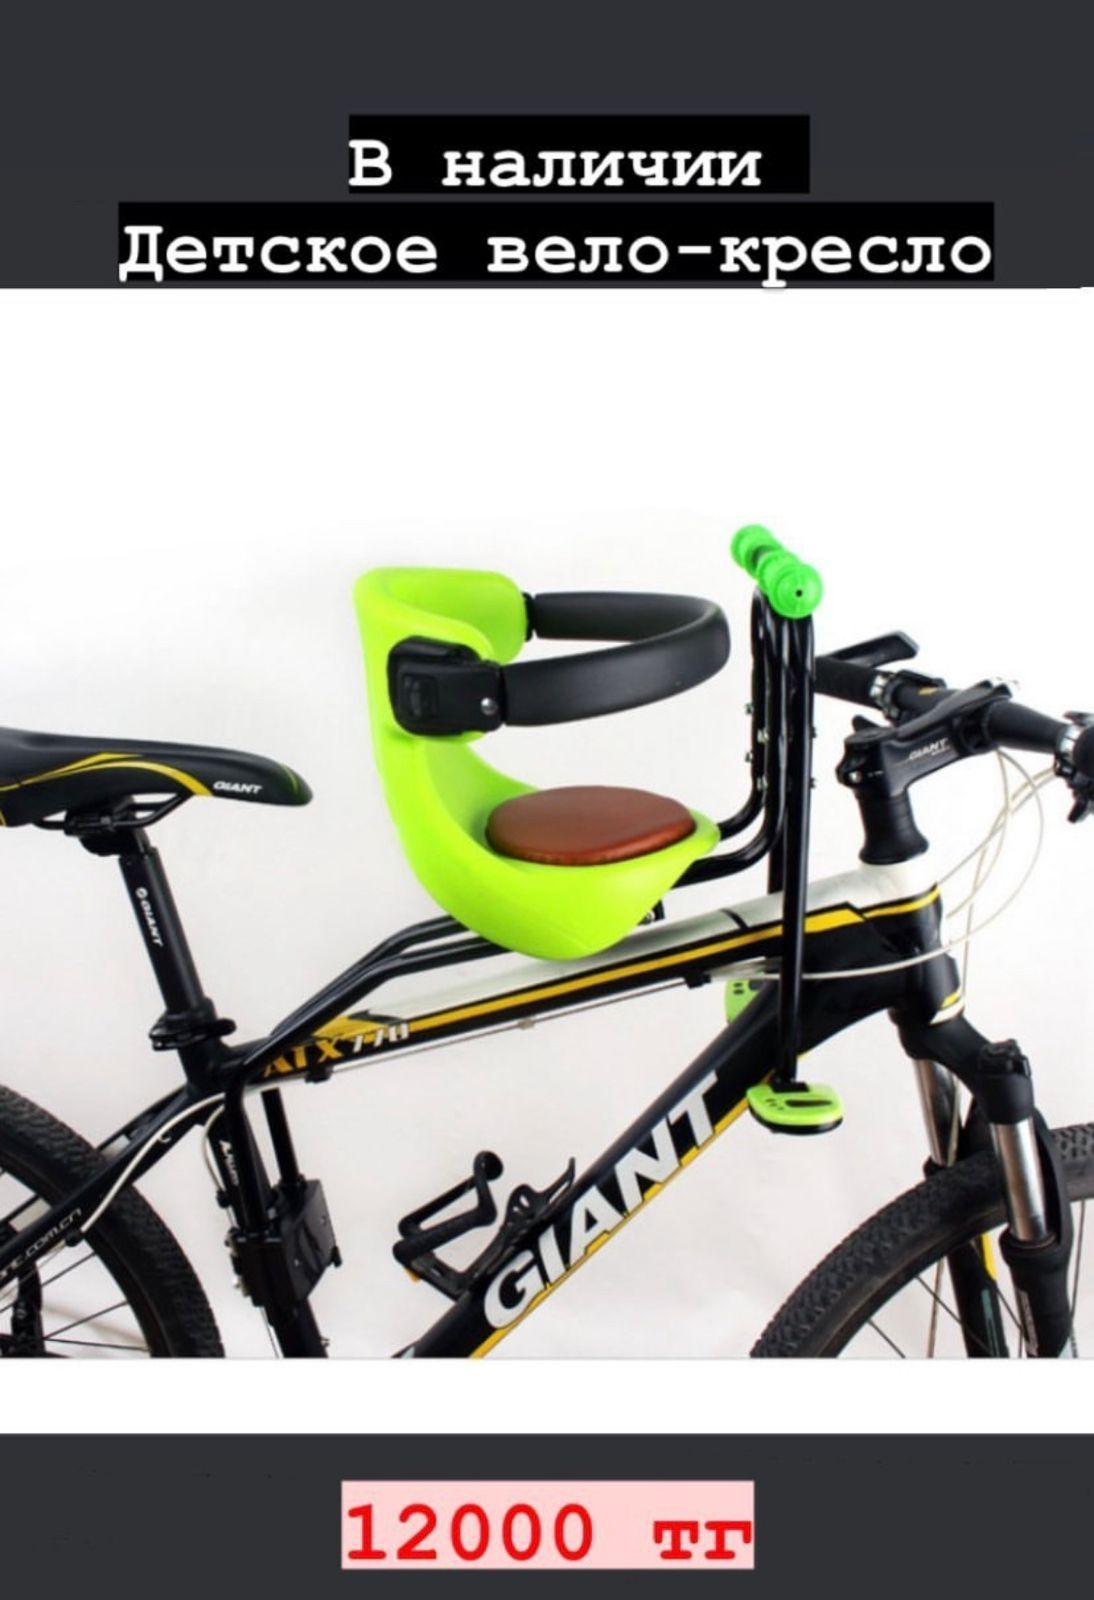 Baby Safety Seat for Bicycle BH 3a